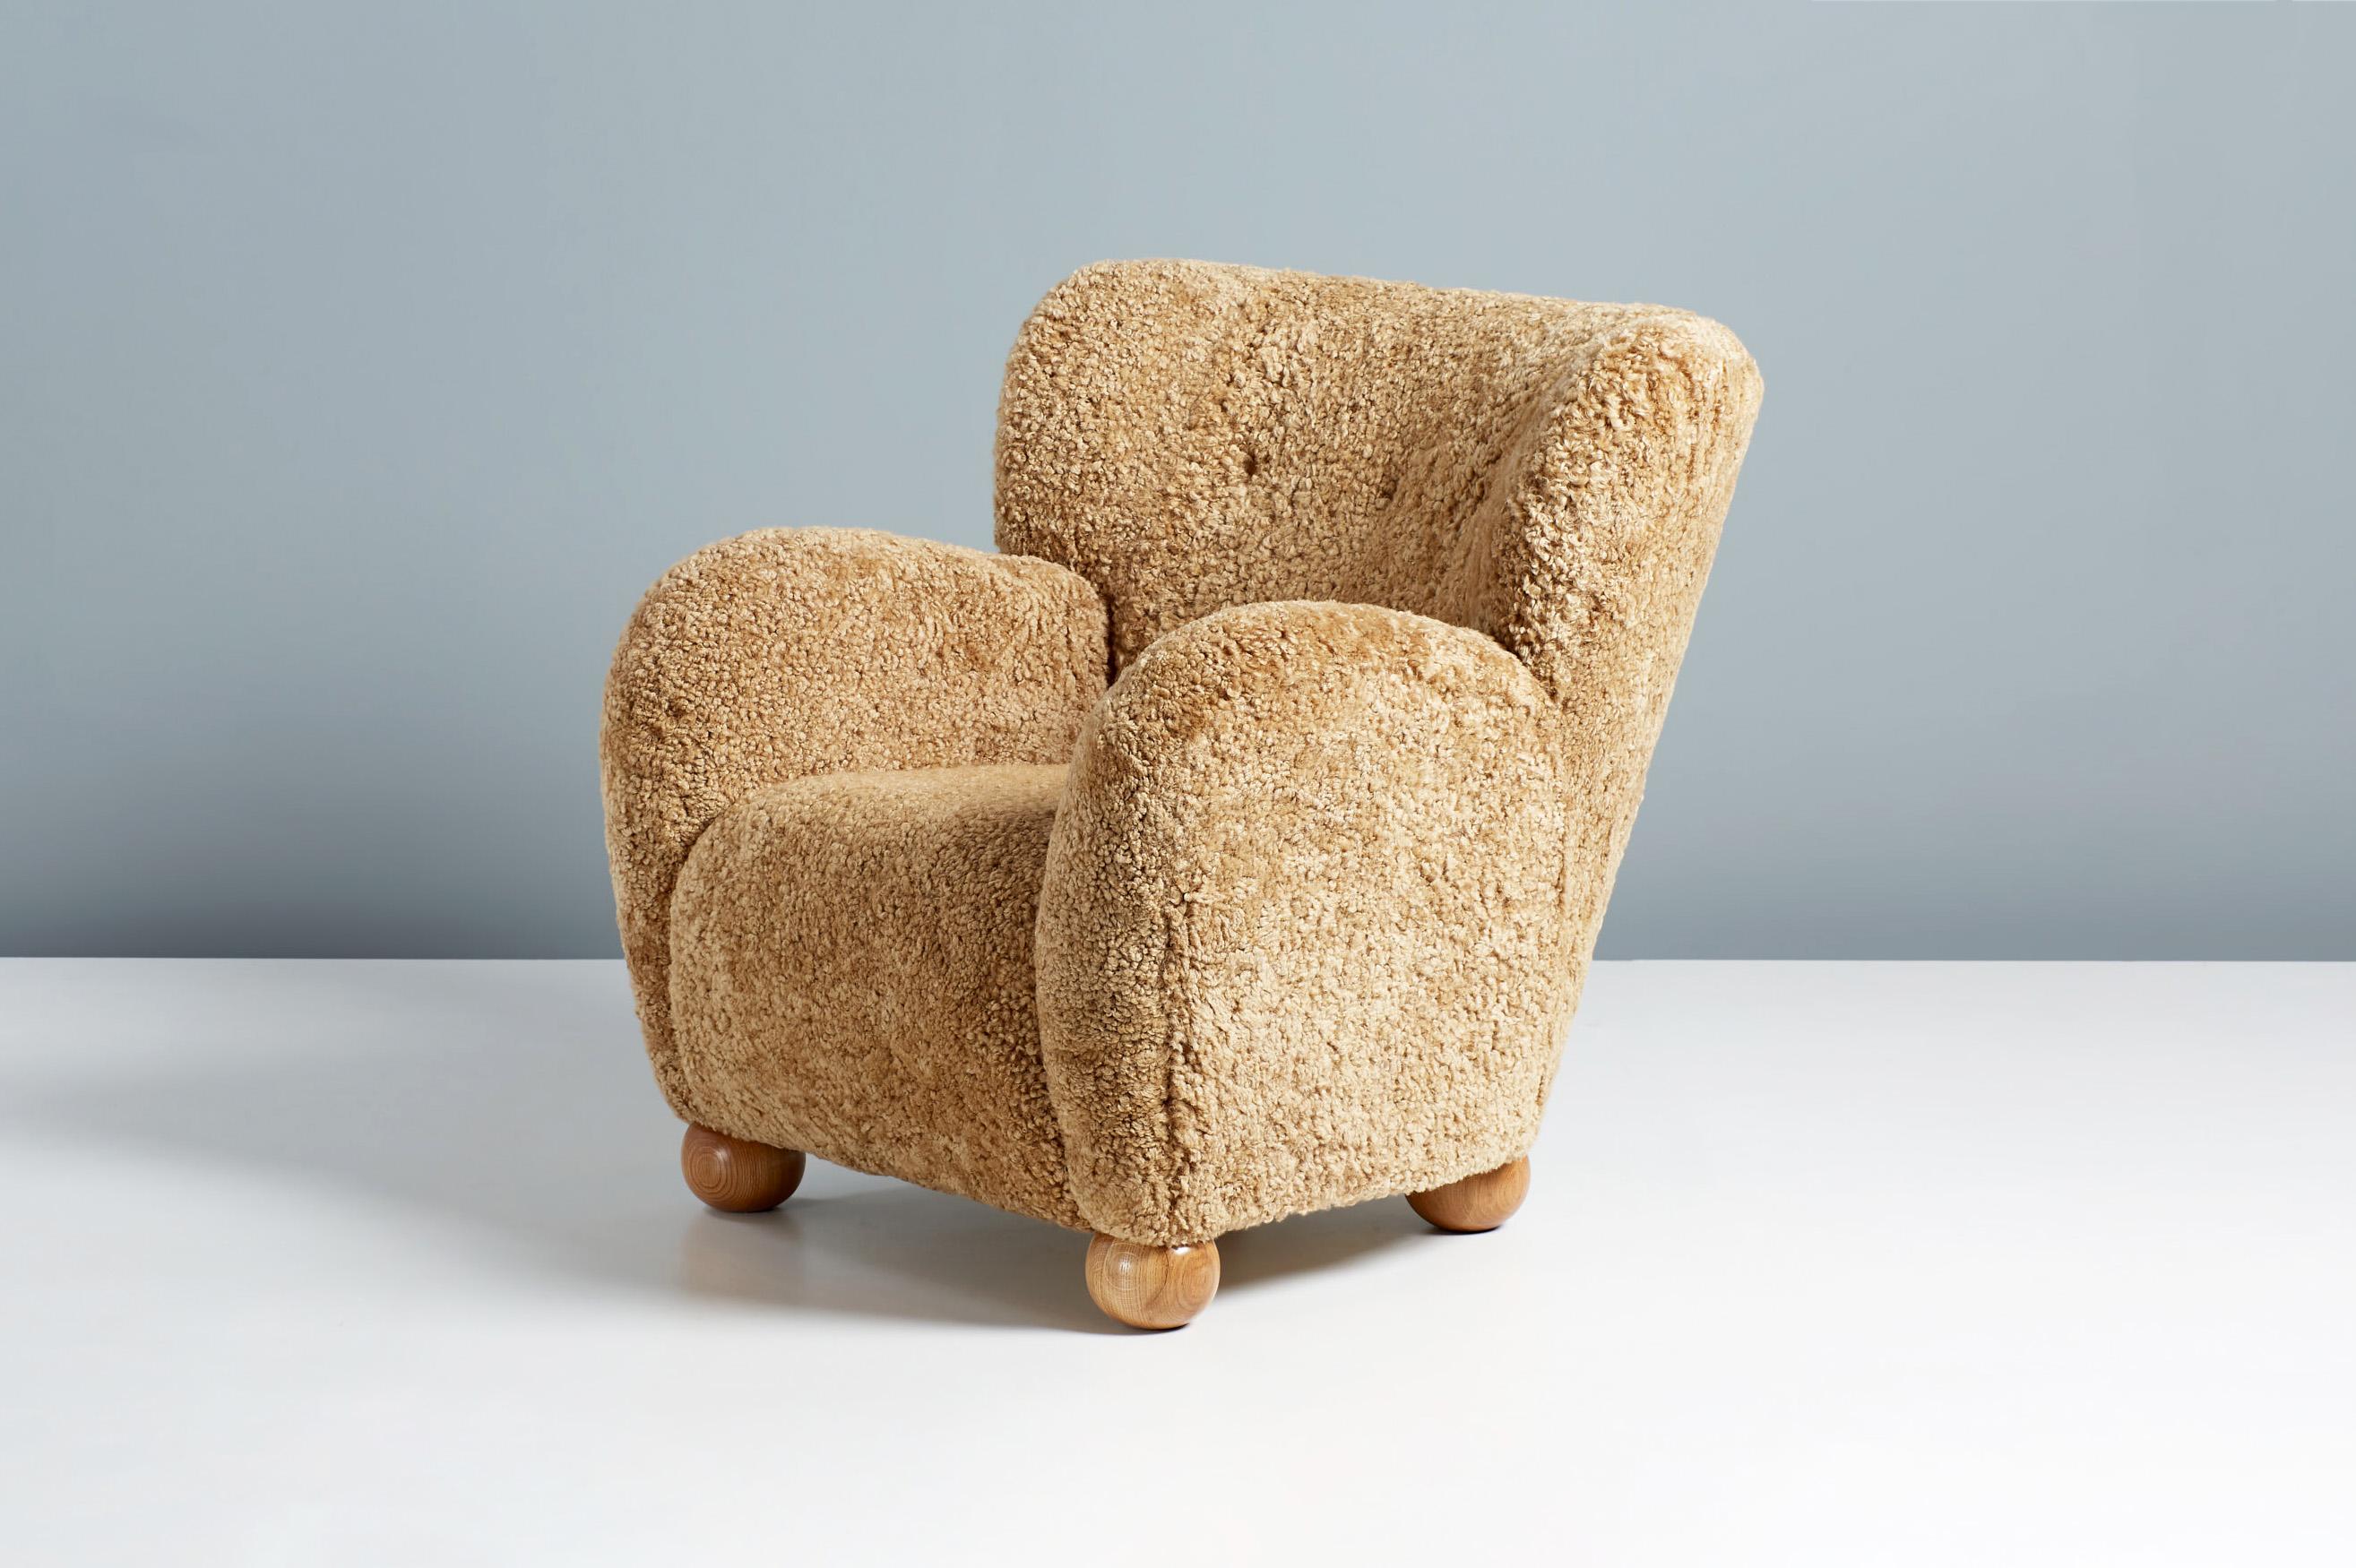 Dagmar design - Karu lounge chair

A custom-made lounge chair developed & produced at our workshops in London using the highest quality materials. This example is upholstered in ‘Maple’ shearling with oiled oak ball feet. The Karu Chair is